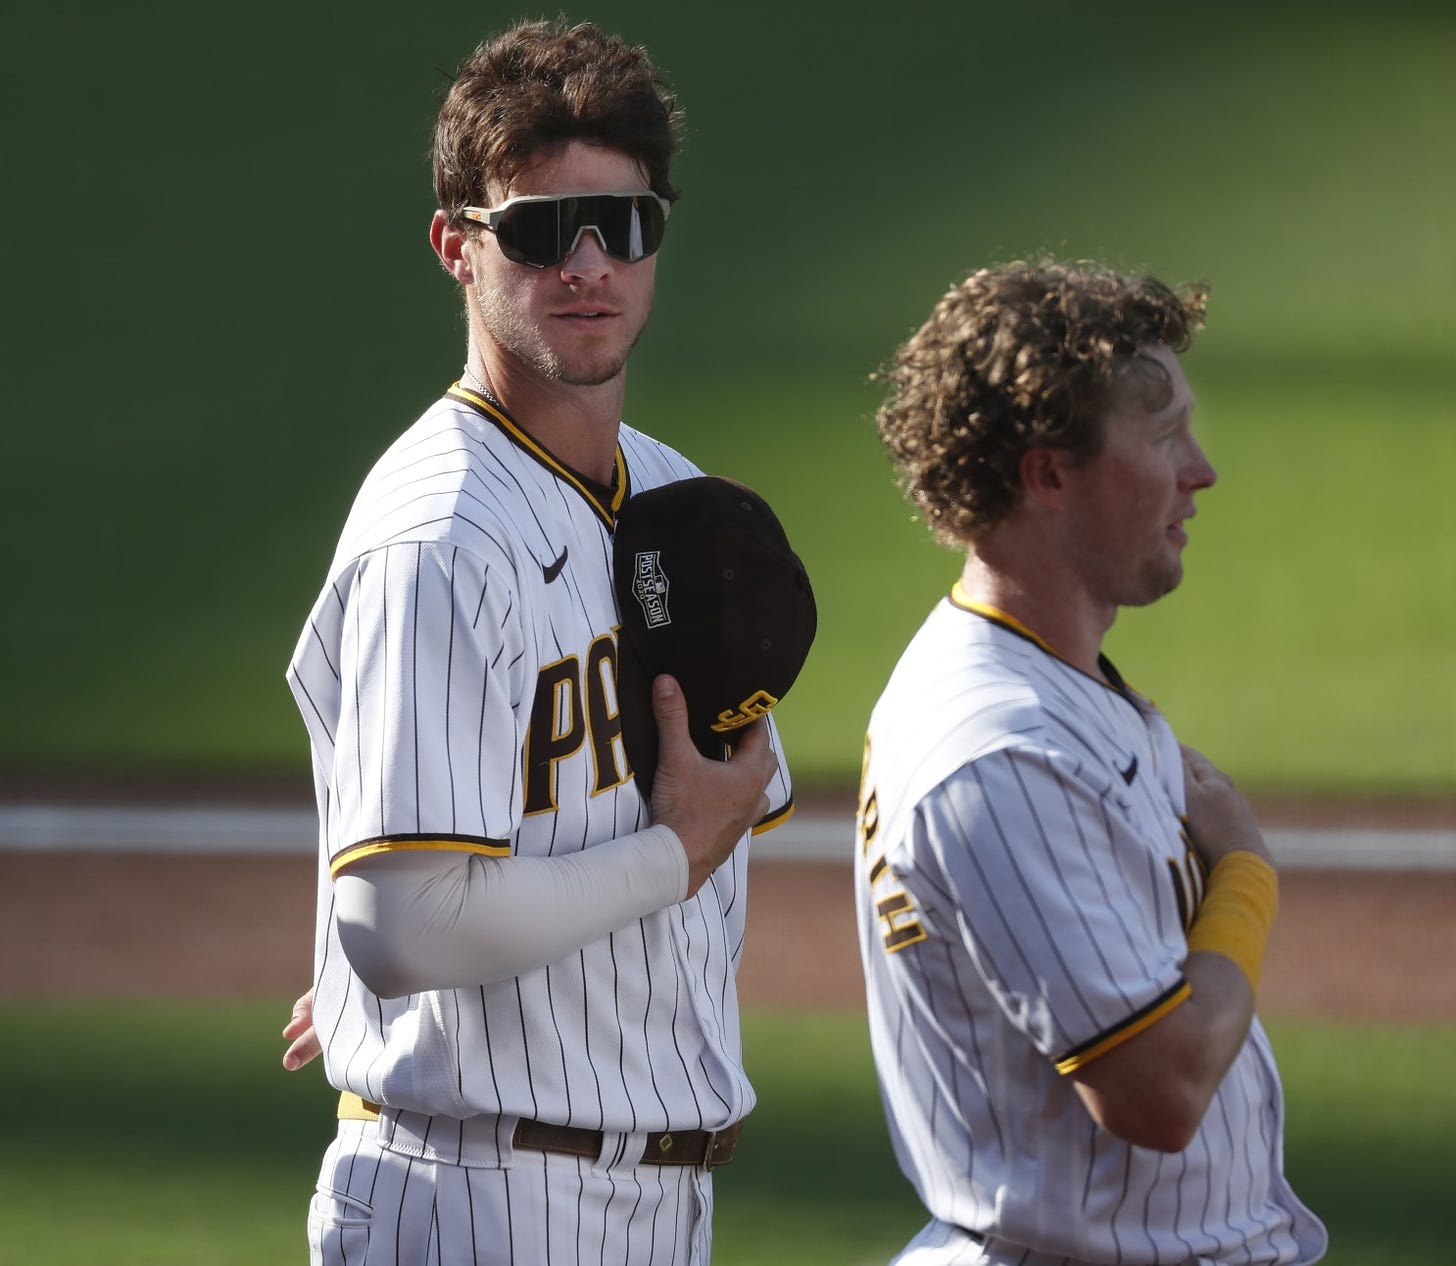 Wil Myers has a lot on his mind - by Michael Rawson